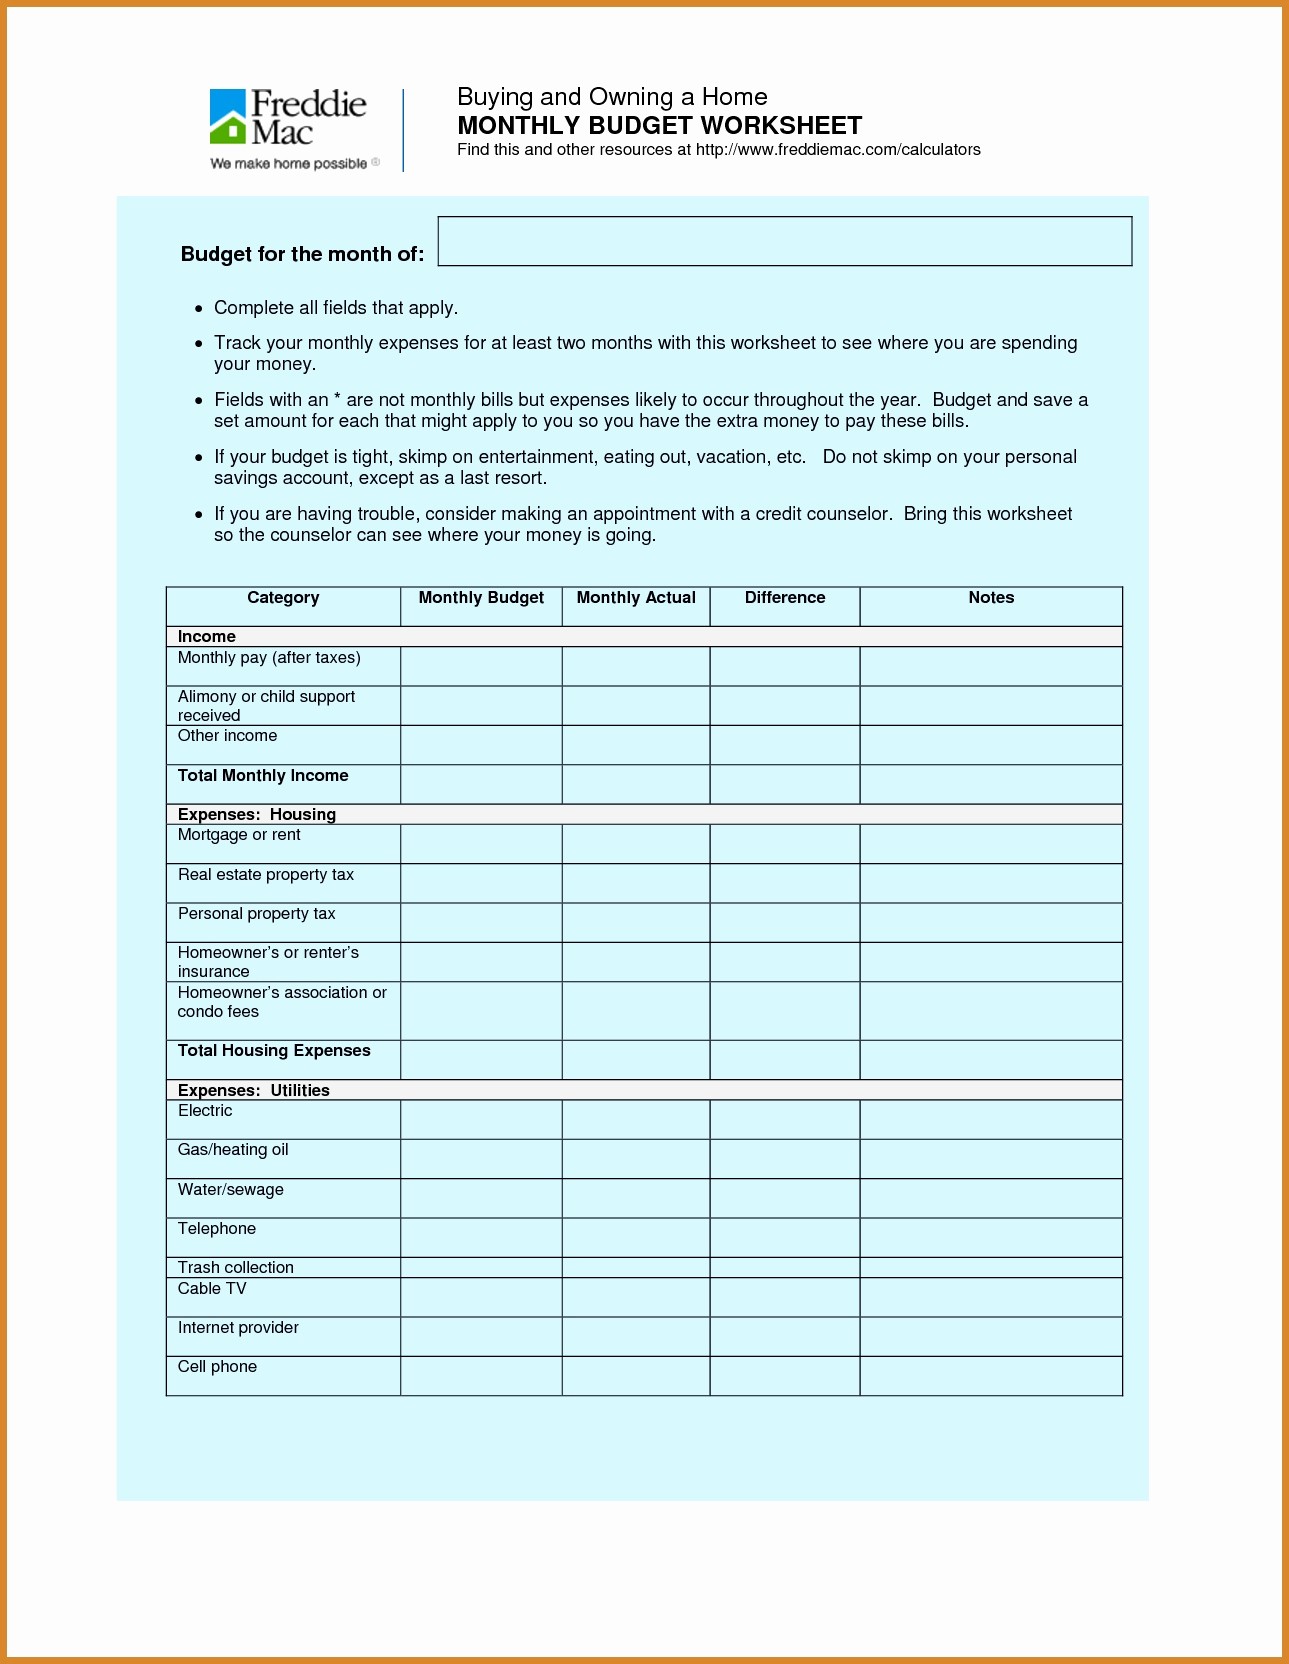 50 Fresh Real Simple Budget Worksheet DOCUMENT IDEAS Document